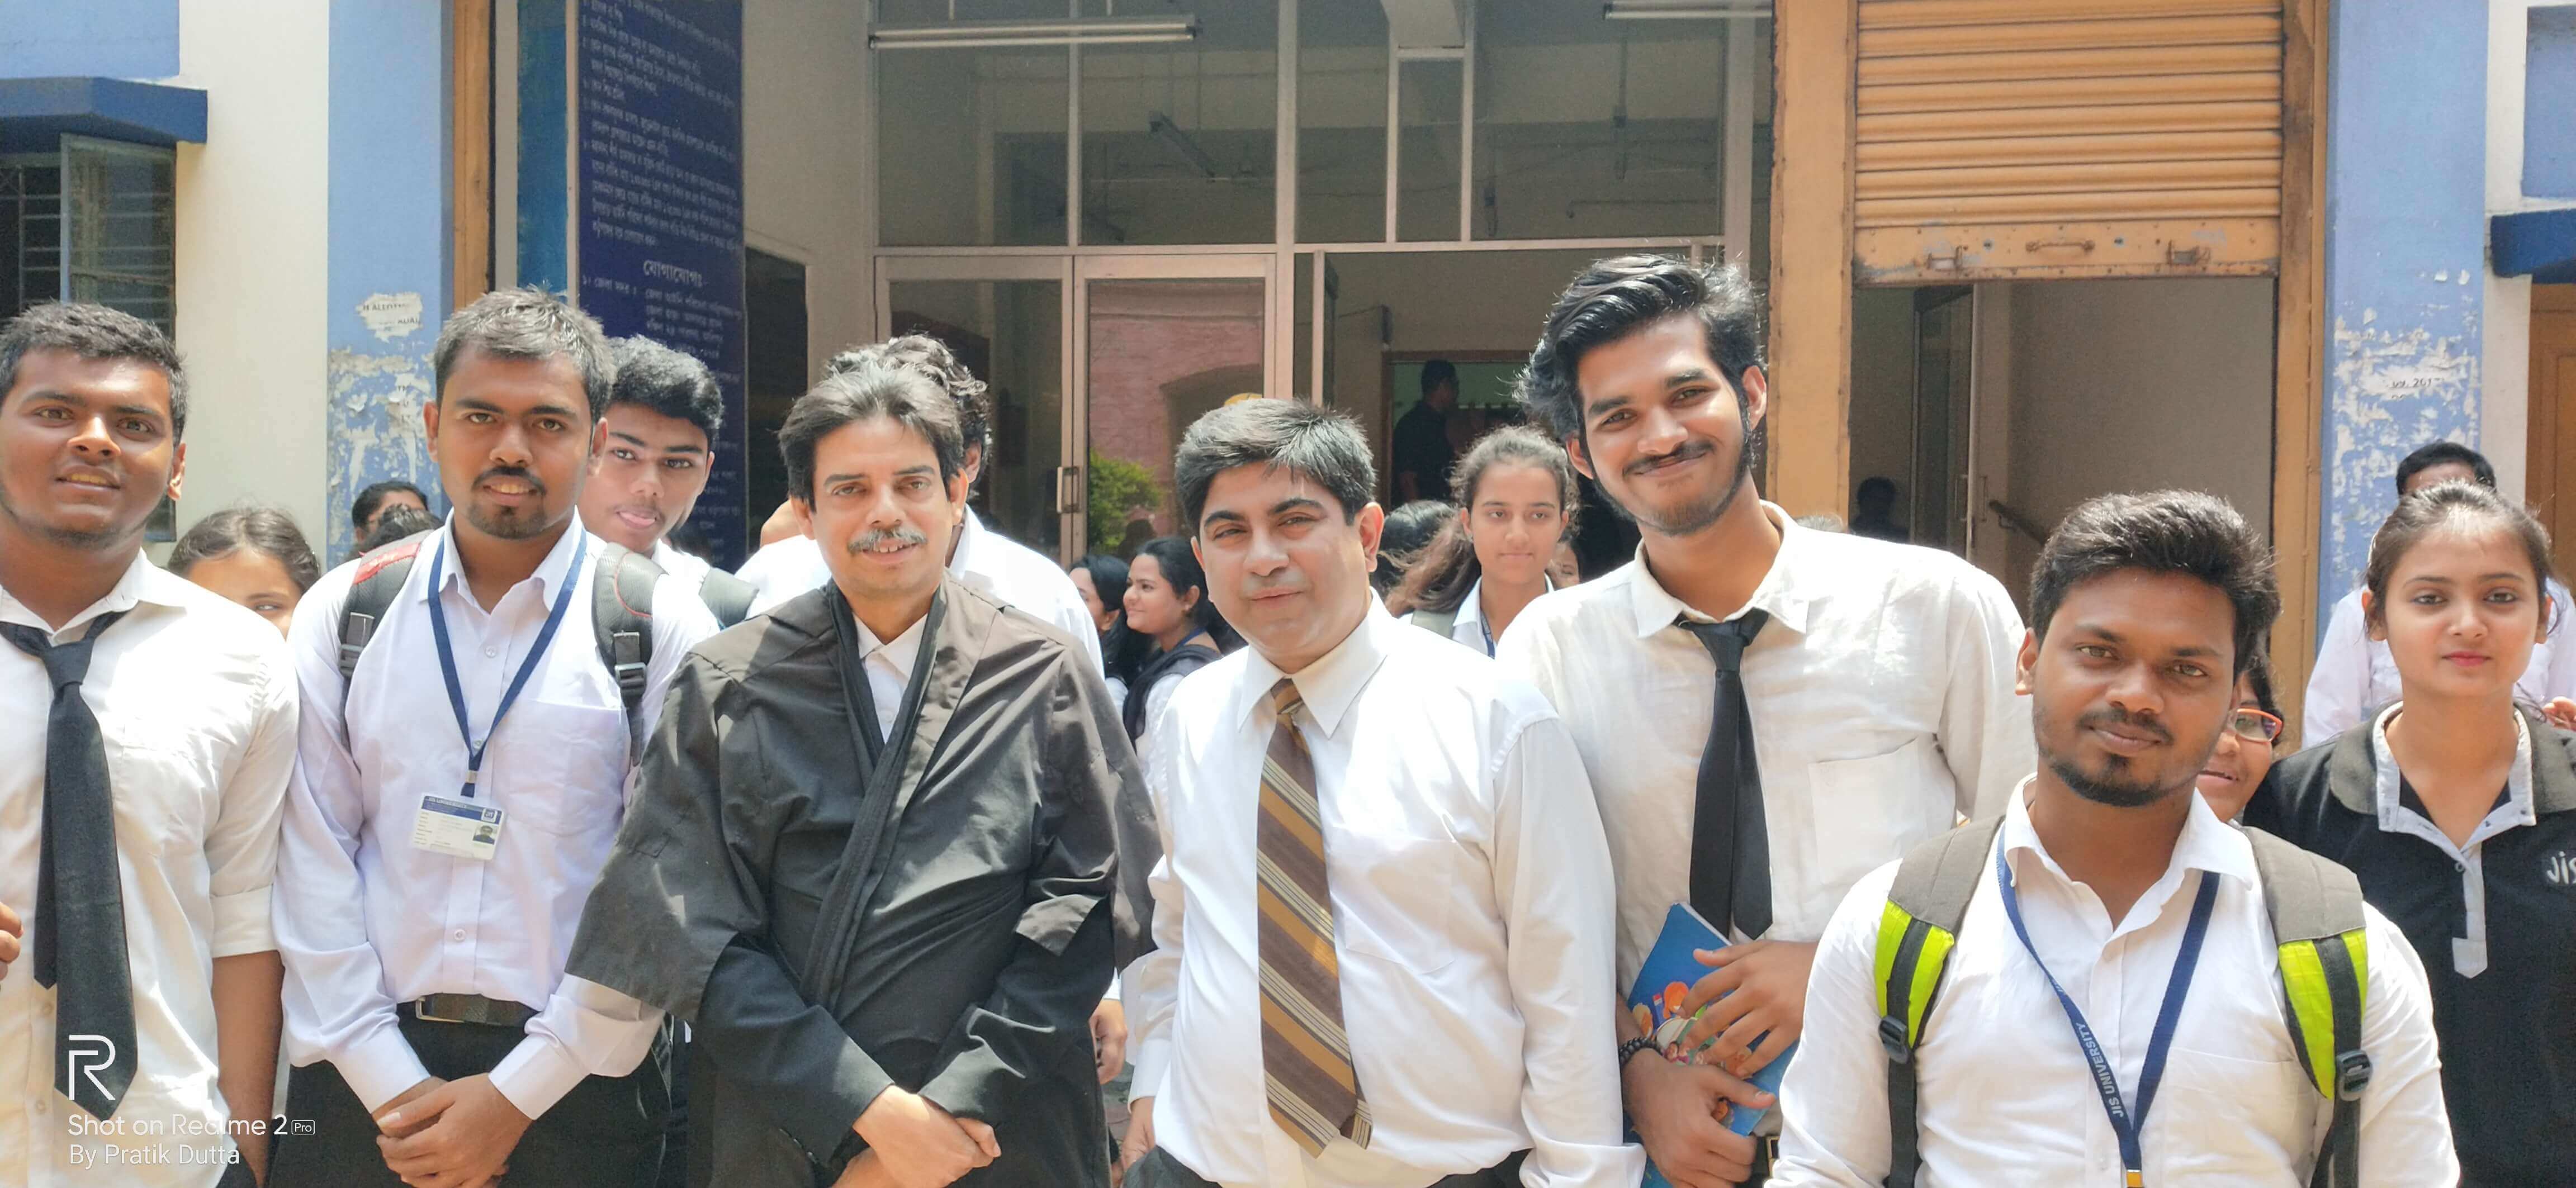 On 8th April, BBA-LLB  and  LLB students  were taken in 2 buses to Alipore Sessions Court. First Alipore Court  Museum was shown where the written statement and judgements of Aurobindo Ghosh Sedition case, Binoy Badal Dinesh case, Khudiram Basu Case are preserved and exhibited. The defence argument of Deshbandhu Chittaranjan Das was explained. The case proceedings in Special Court relating to murder alleged to have been committed by 2  persons including a juvenile was also shown.